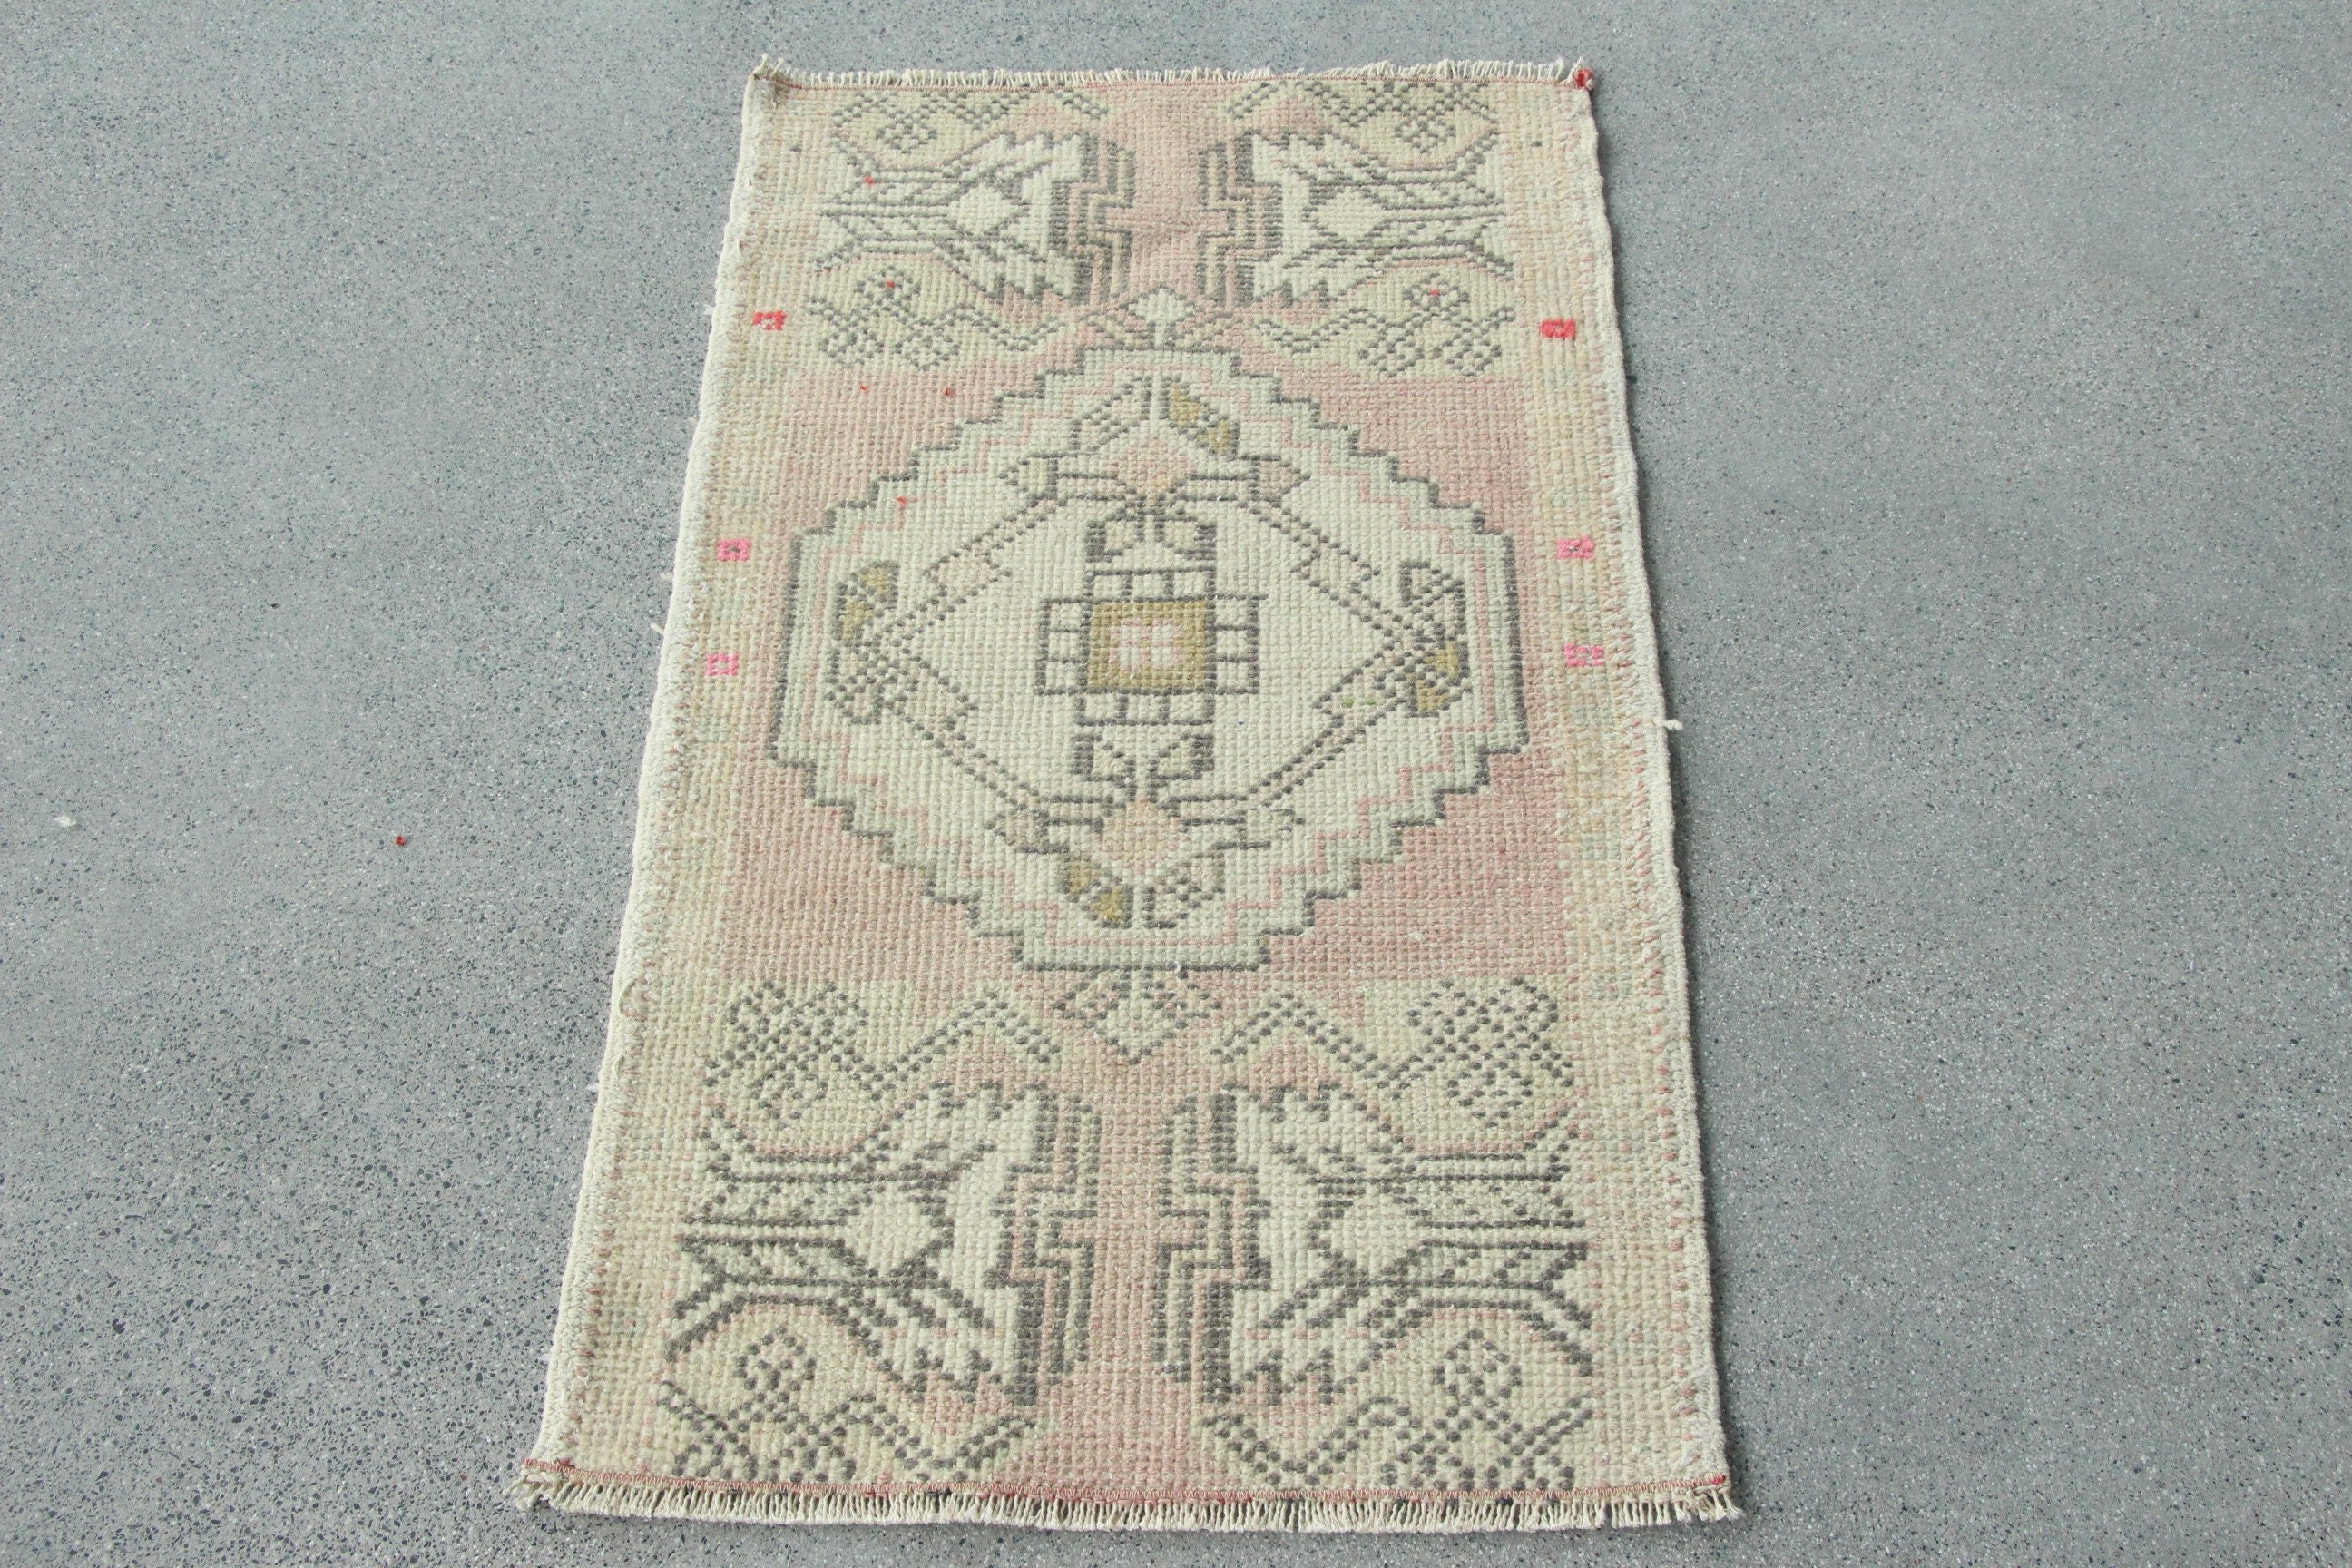 Turkish Rugs, Bedroom Rug, Vintage Rugs, Gray Moroccan Rugs, Rugs for Bedroom, Entry Rug, 1.7x2.9 ft Small Rug, Kitchen Rug